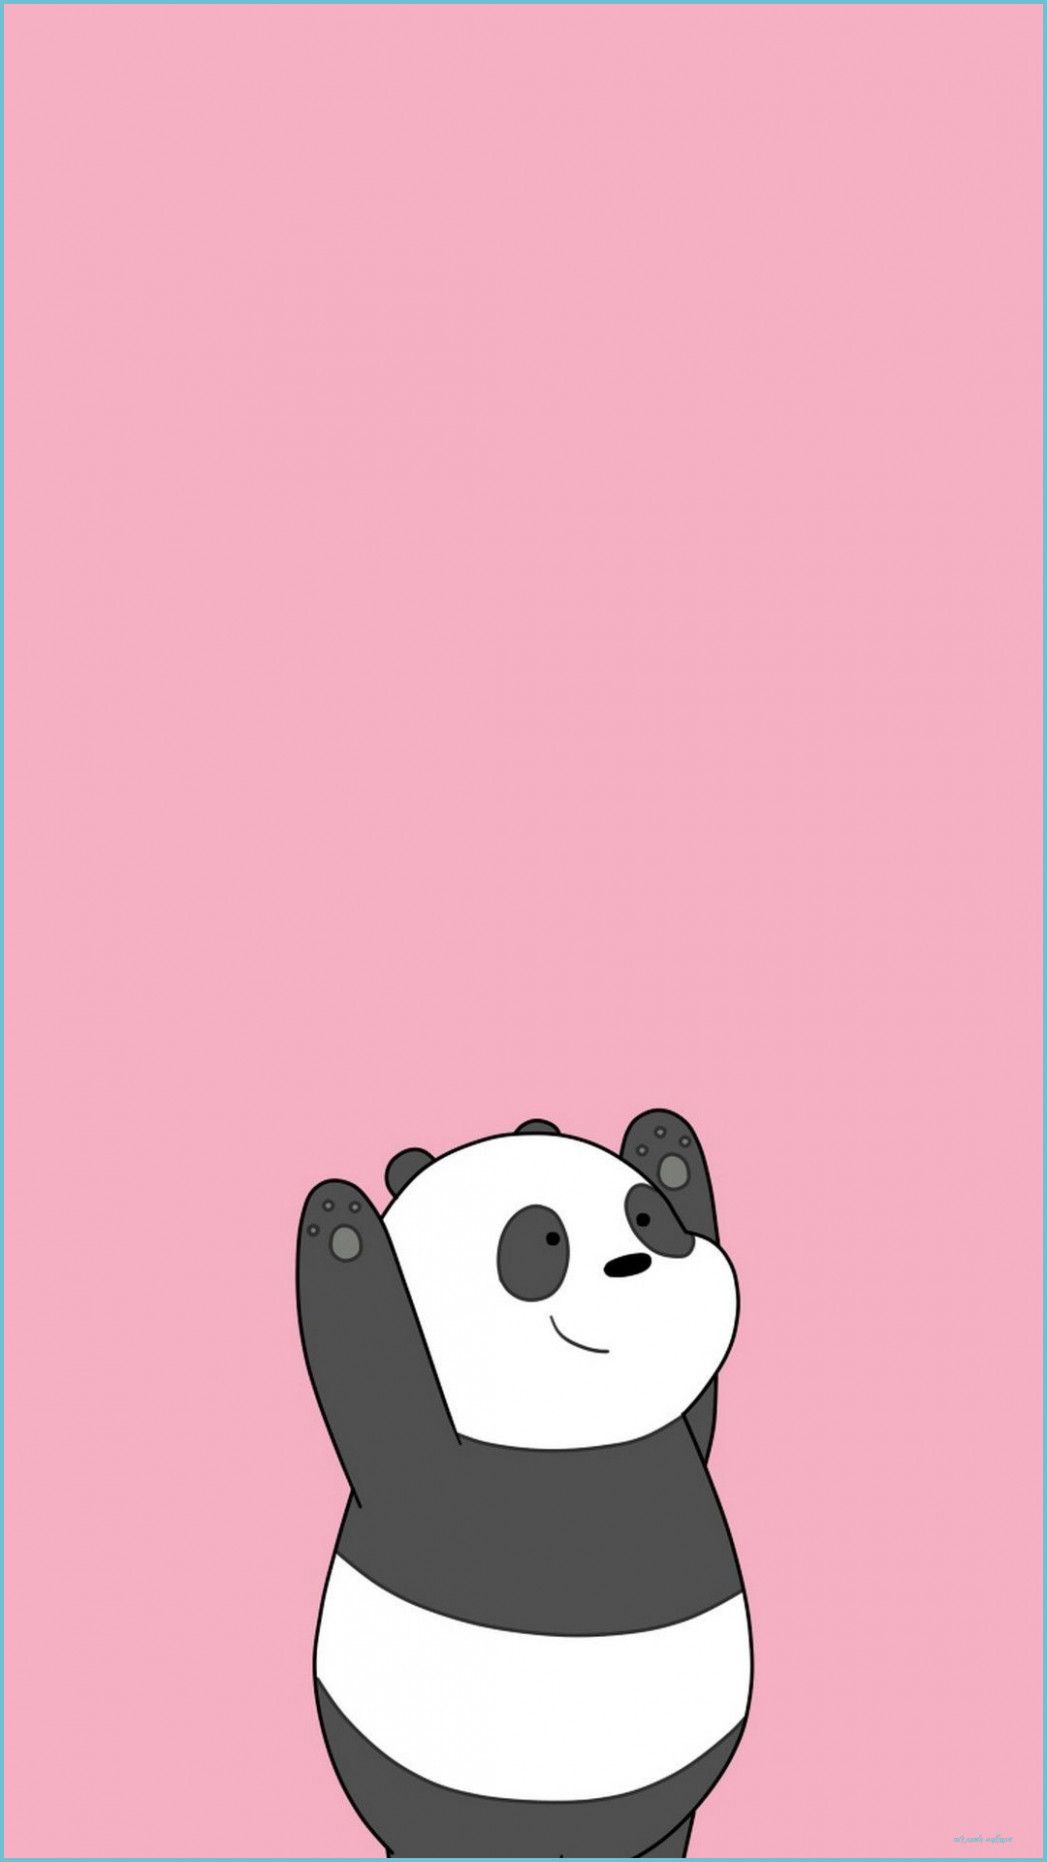 Unconventional Knowledge About Cute Panda Wallpaper That